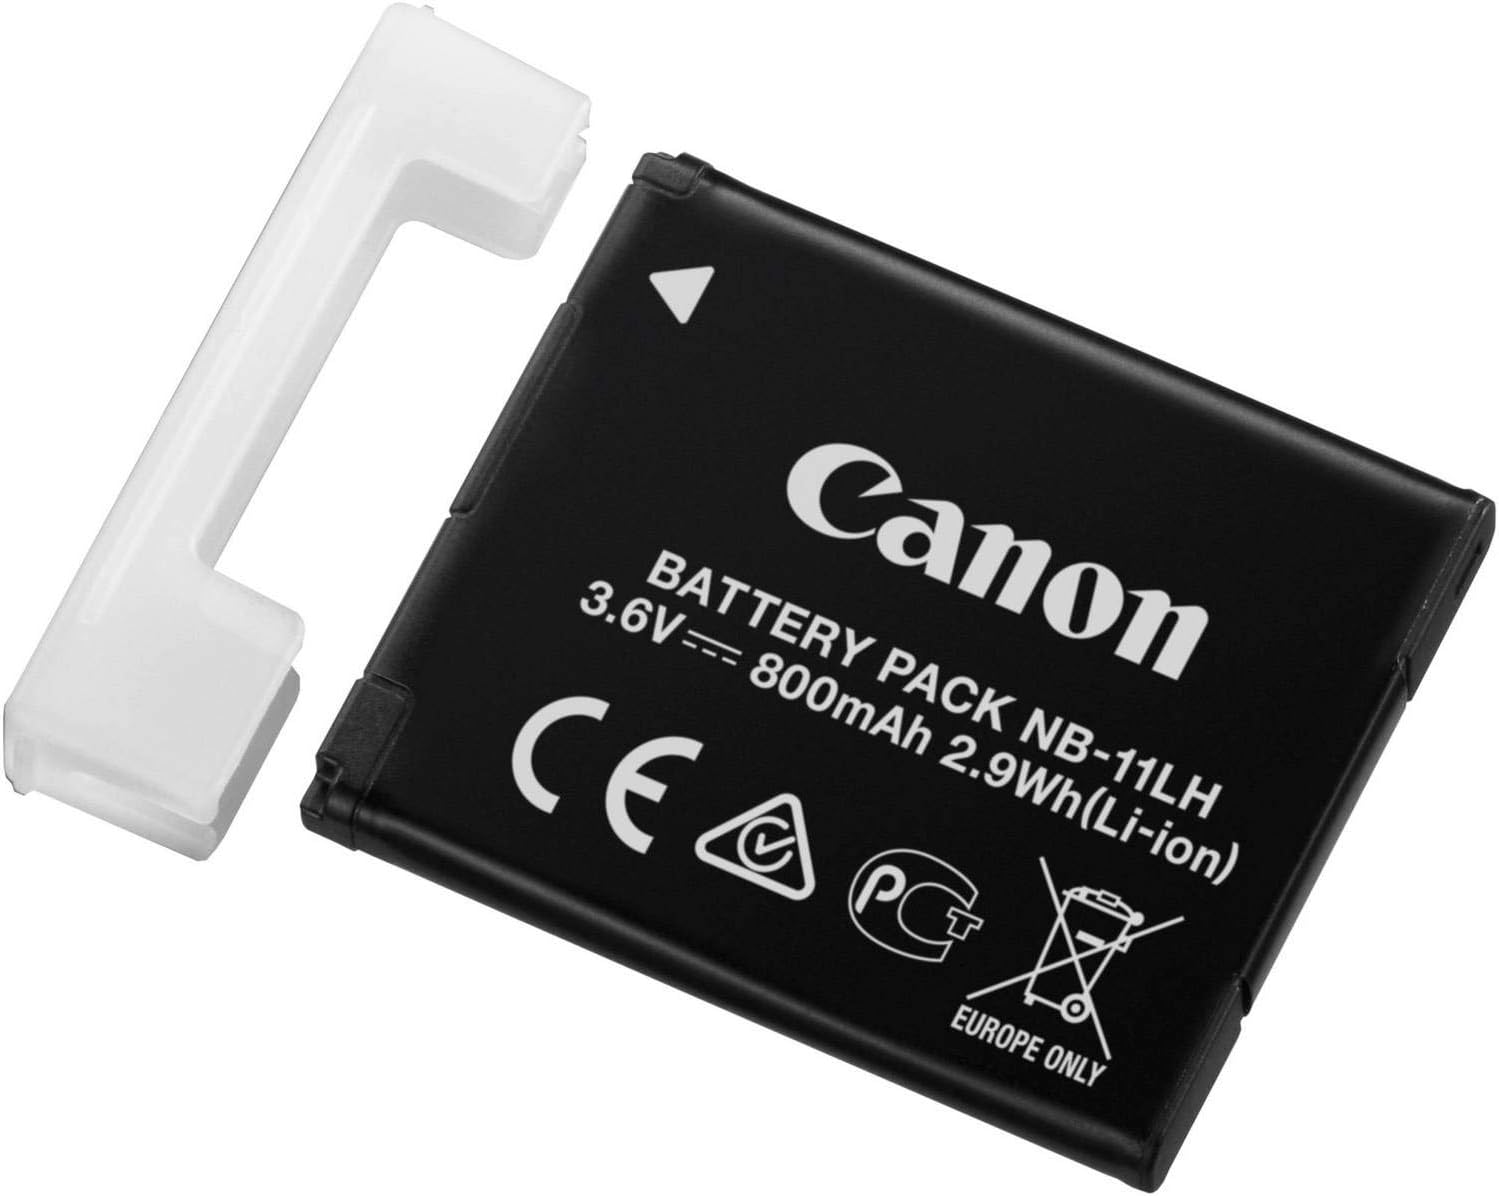 Canon NB-11LH Battery Pack - New